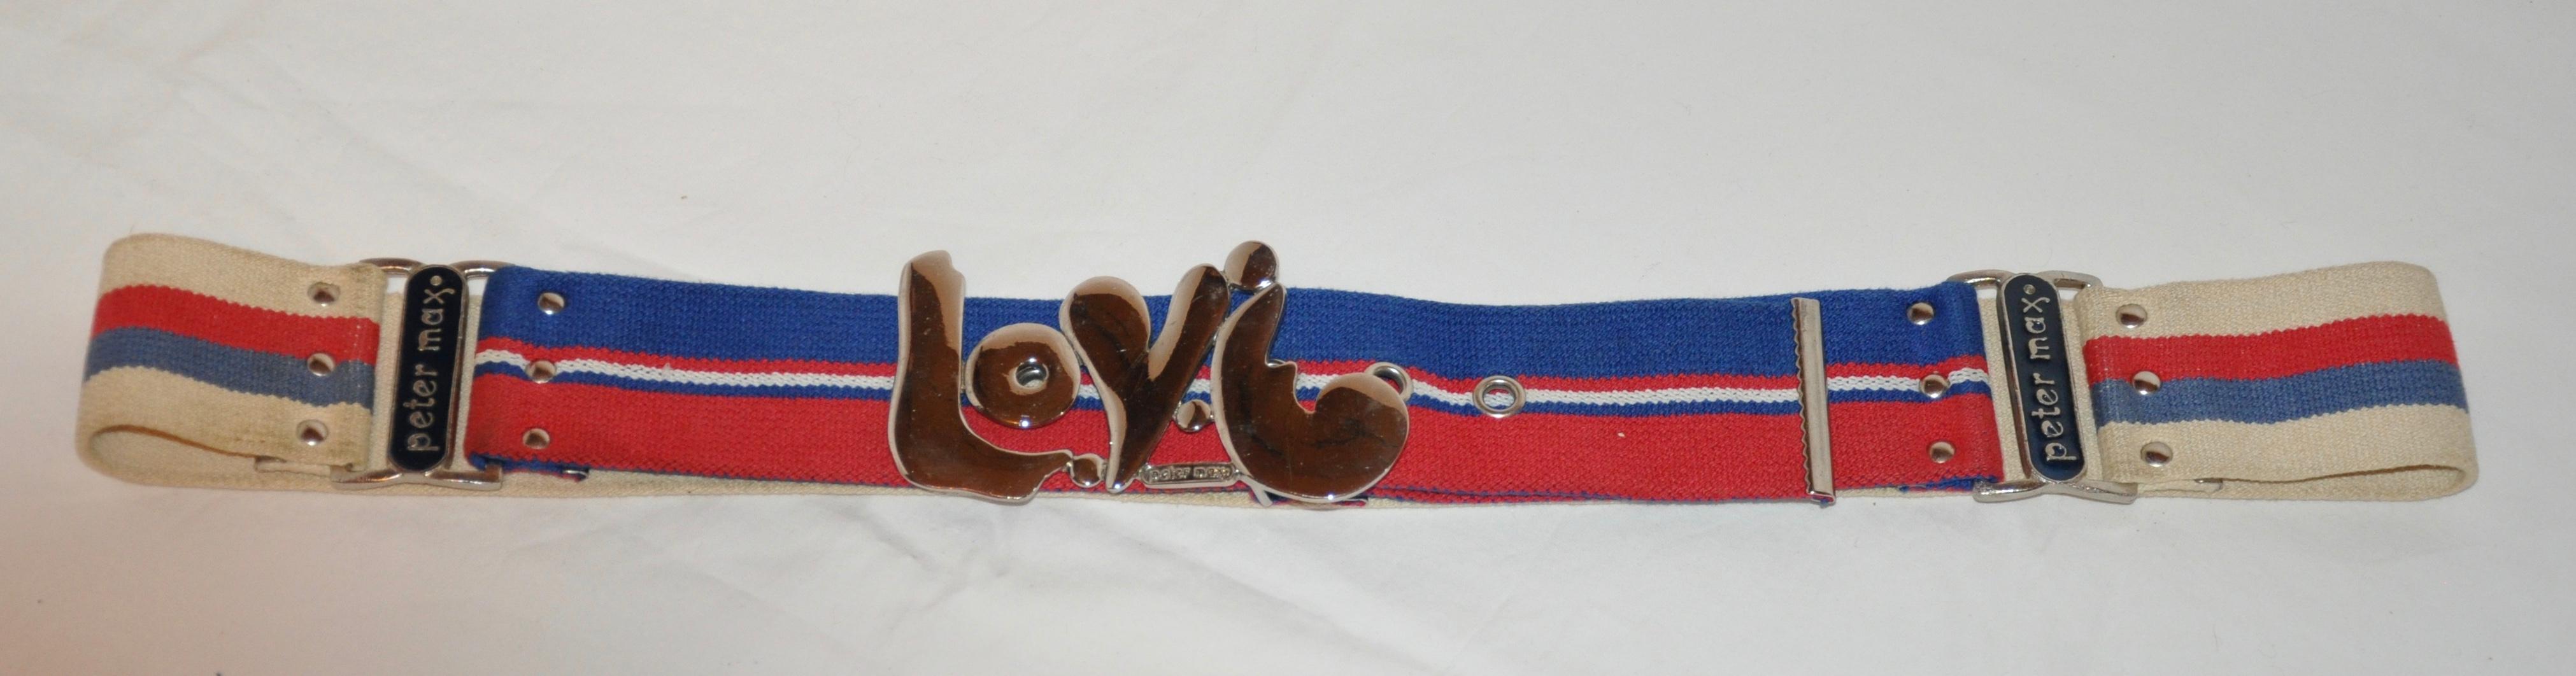     This rare Peter Max designed for Canterburg belt, displays in whimsical lettering 